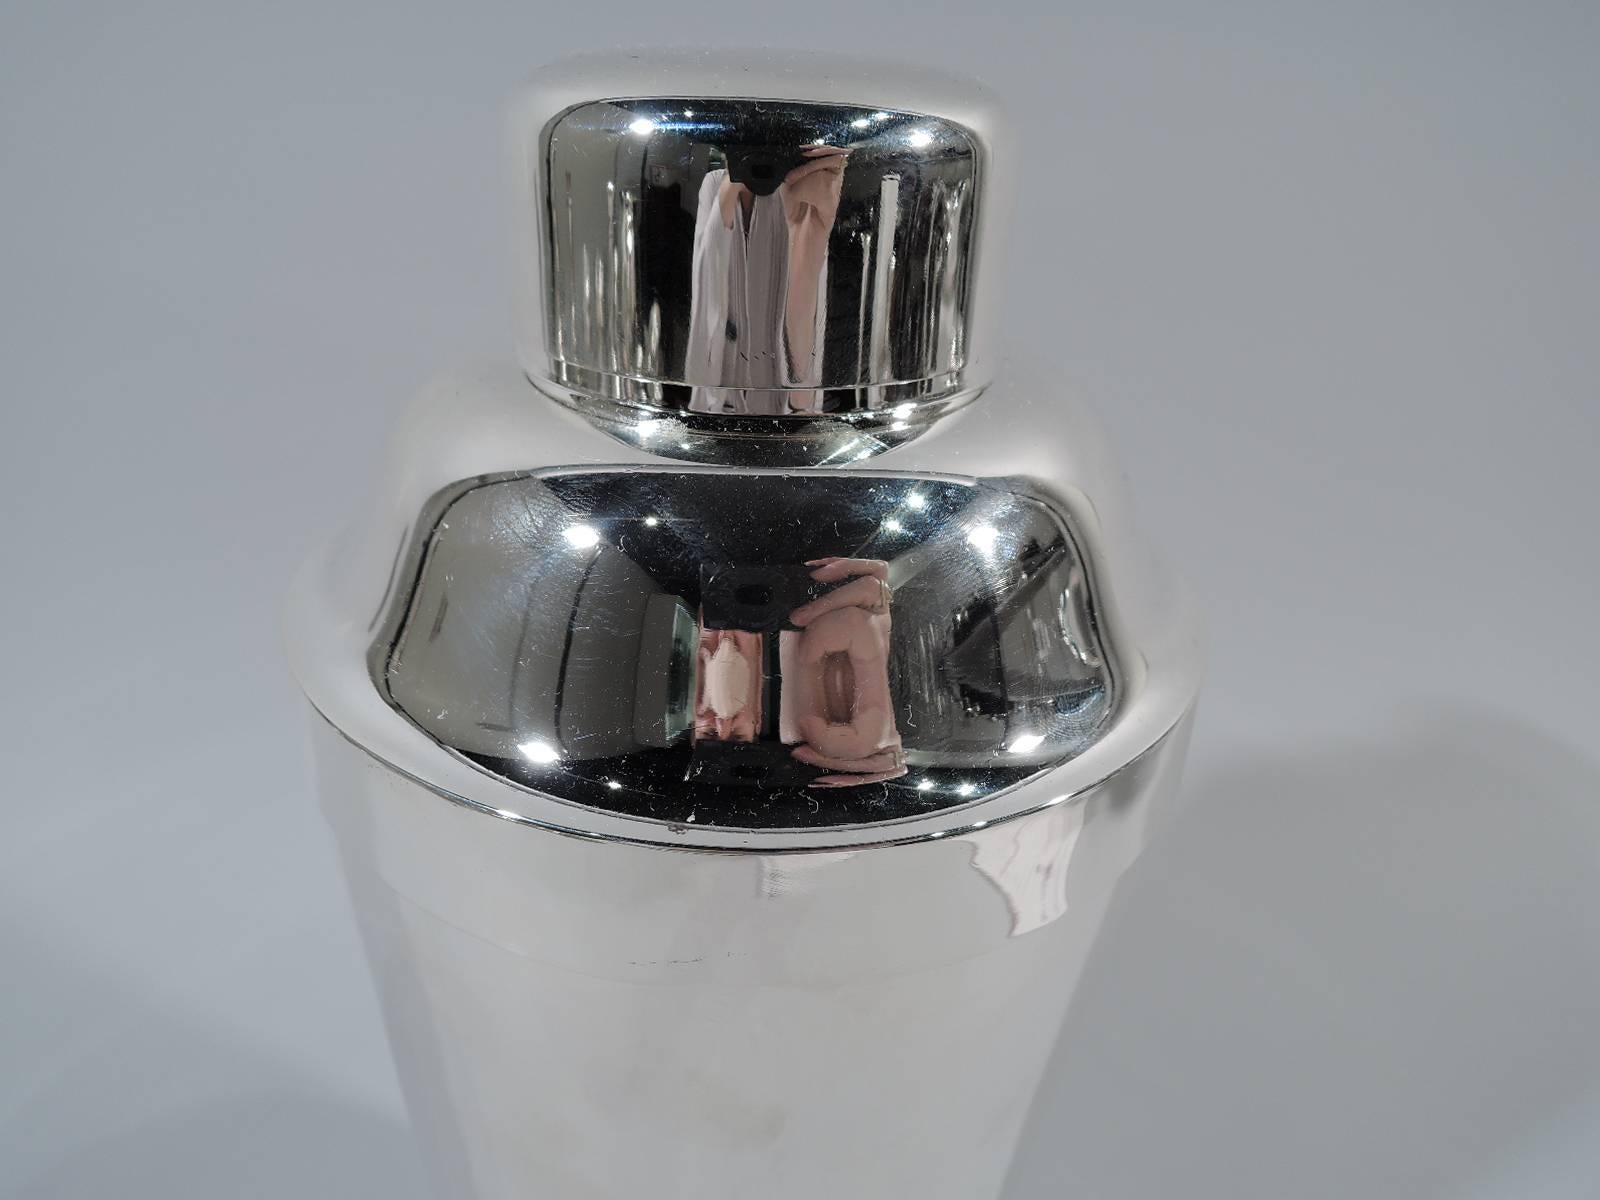 Prohibition-era sterling silver cocktail Shaker. Made by S Kirk & Son Inc. in Baltimore. Tapering sides and dome cover with short neck, built-in strainer, and snug-fitting cap. A party-size piece from the naughty years. Hallmark (1925-32) with no.